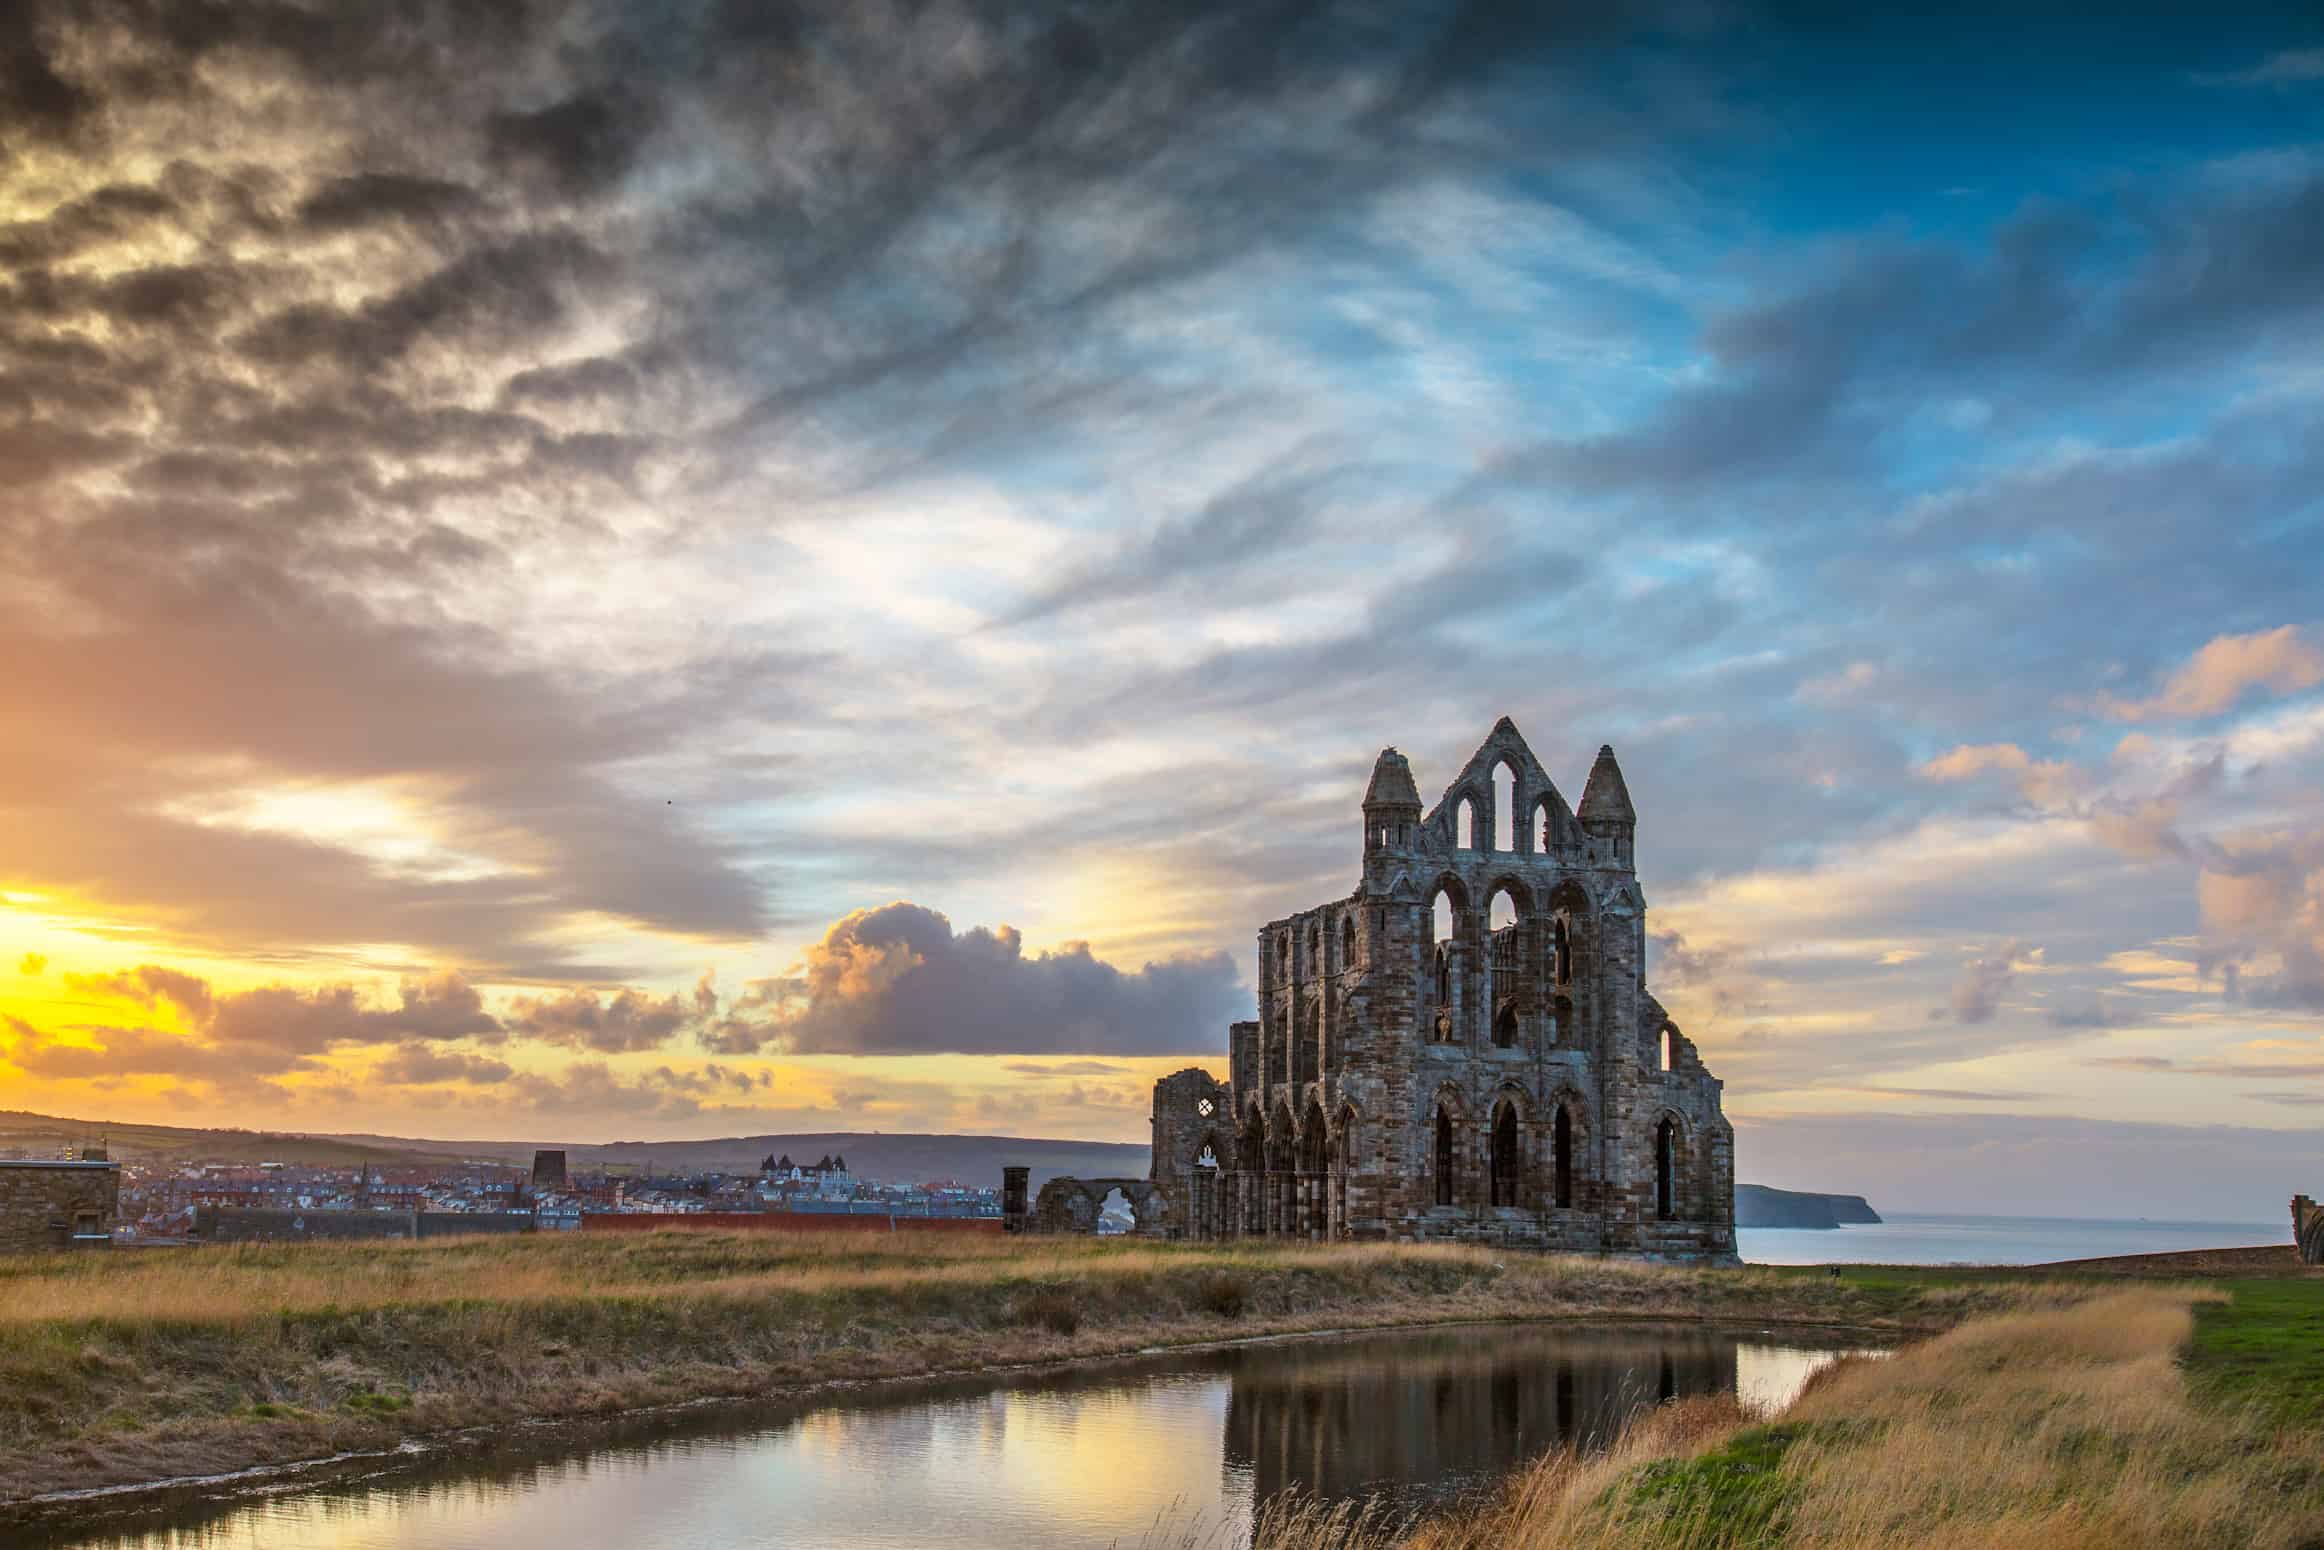 Whitby Abbey Evening Light. Licensed by the GCI from Shutterstock.com